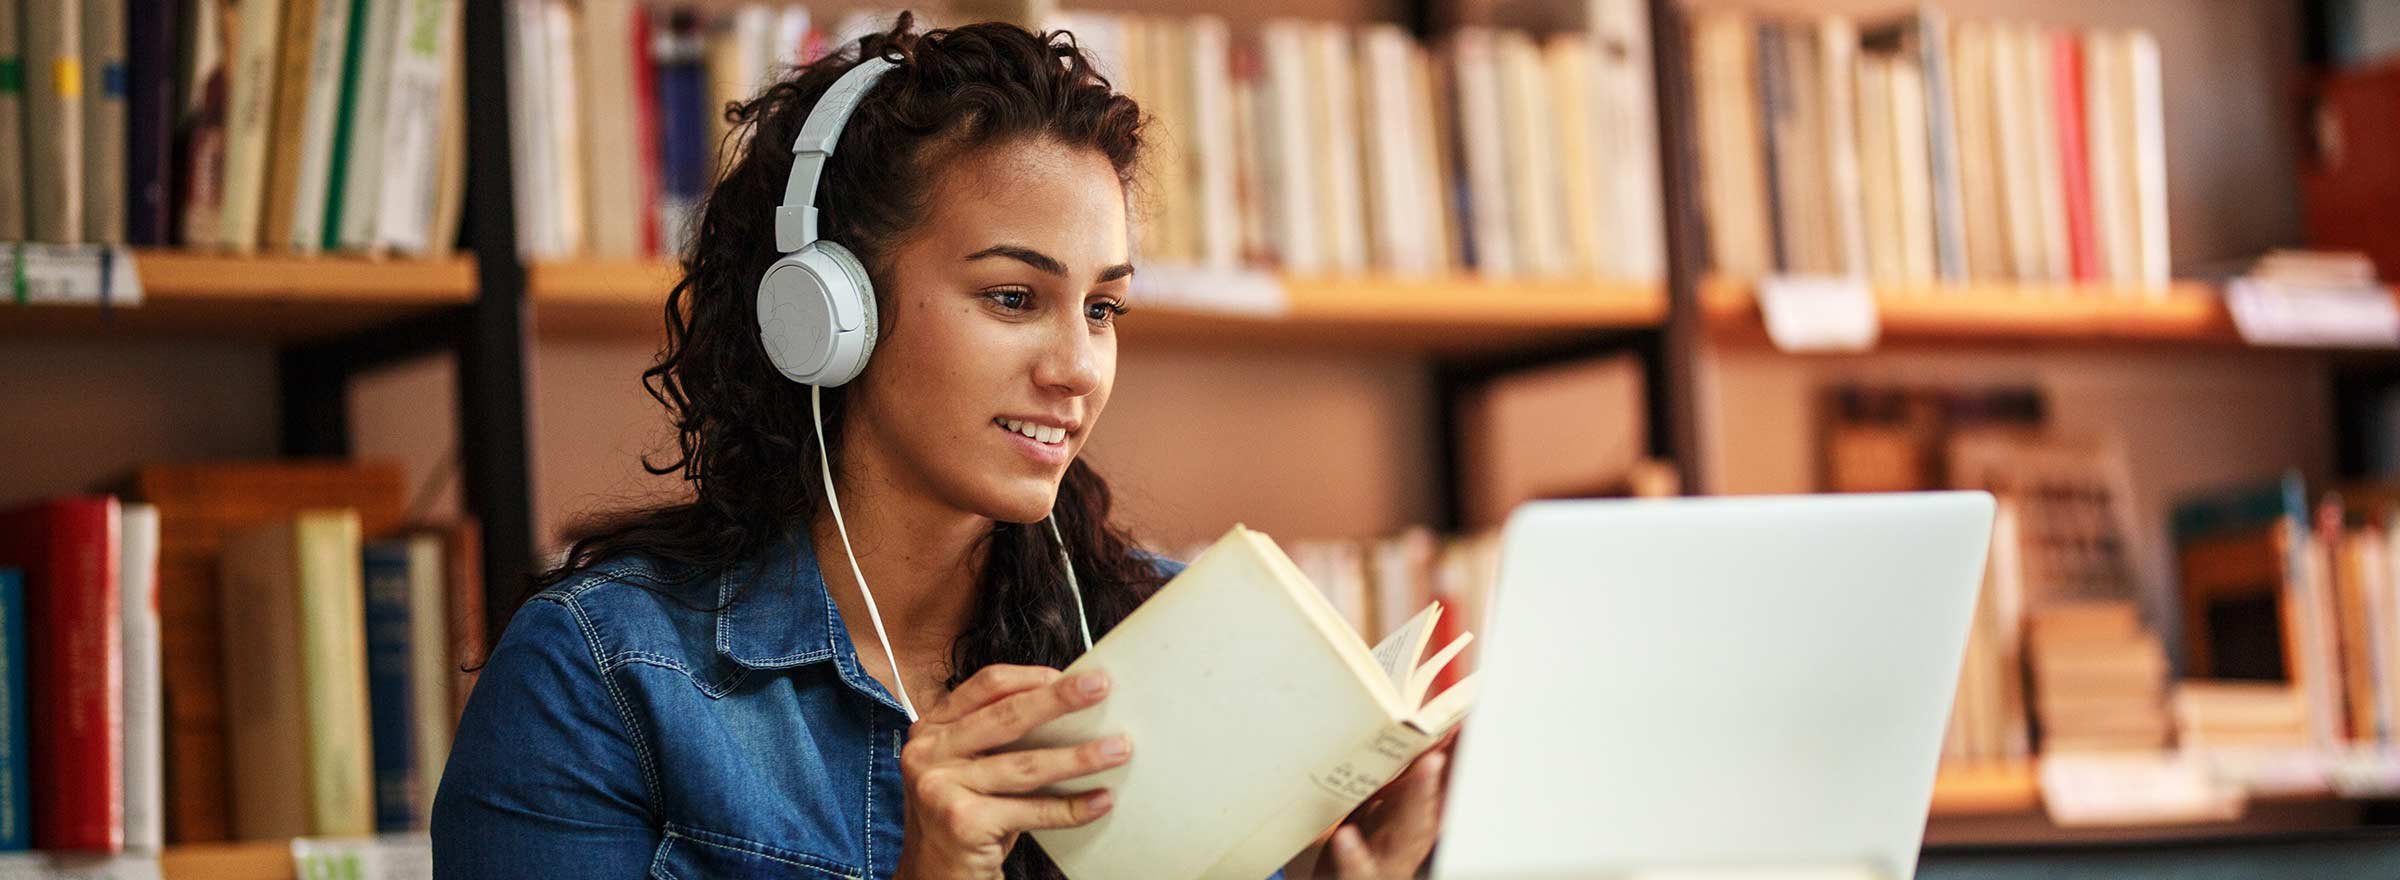 woman in library with laptop, headphones, and a paper book